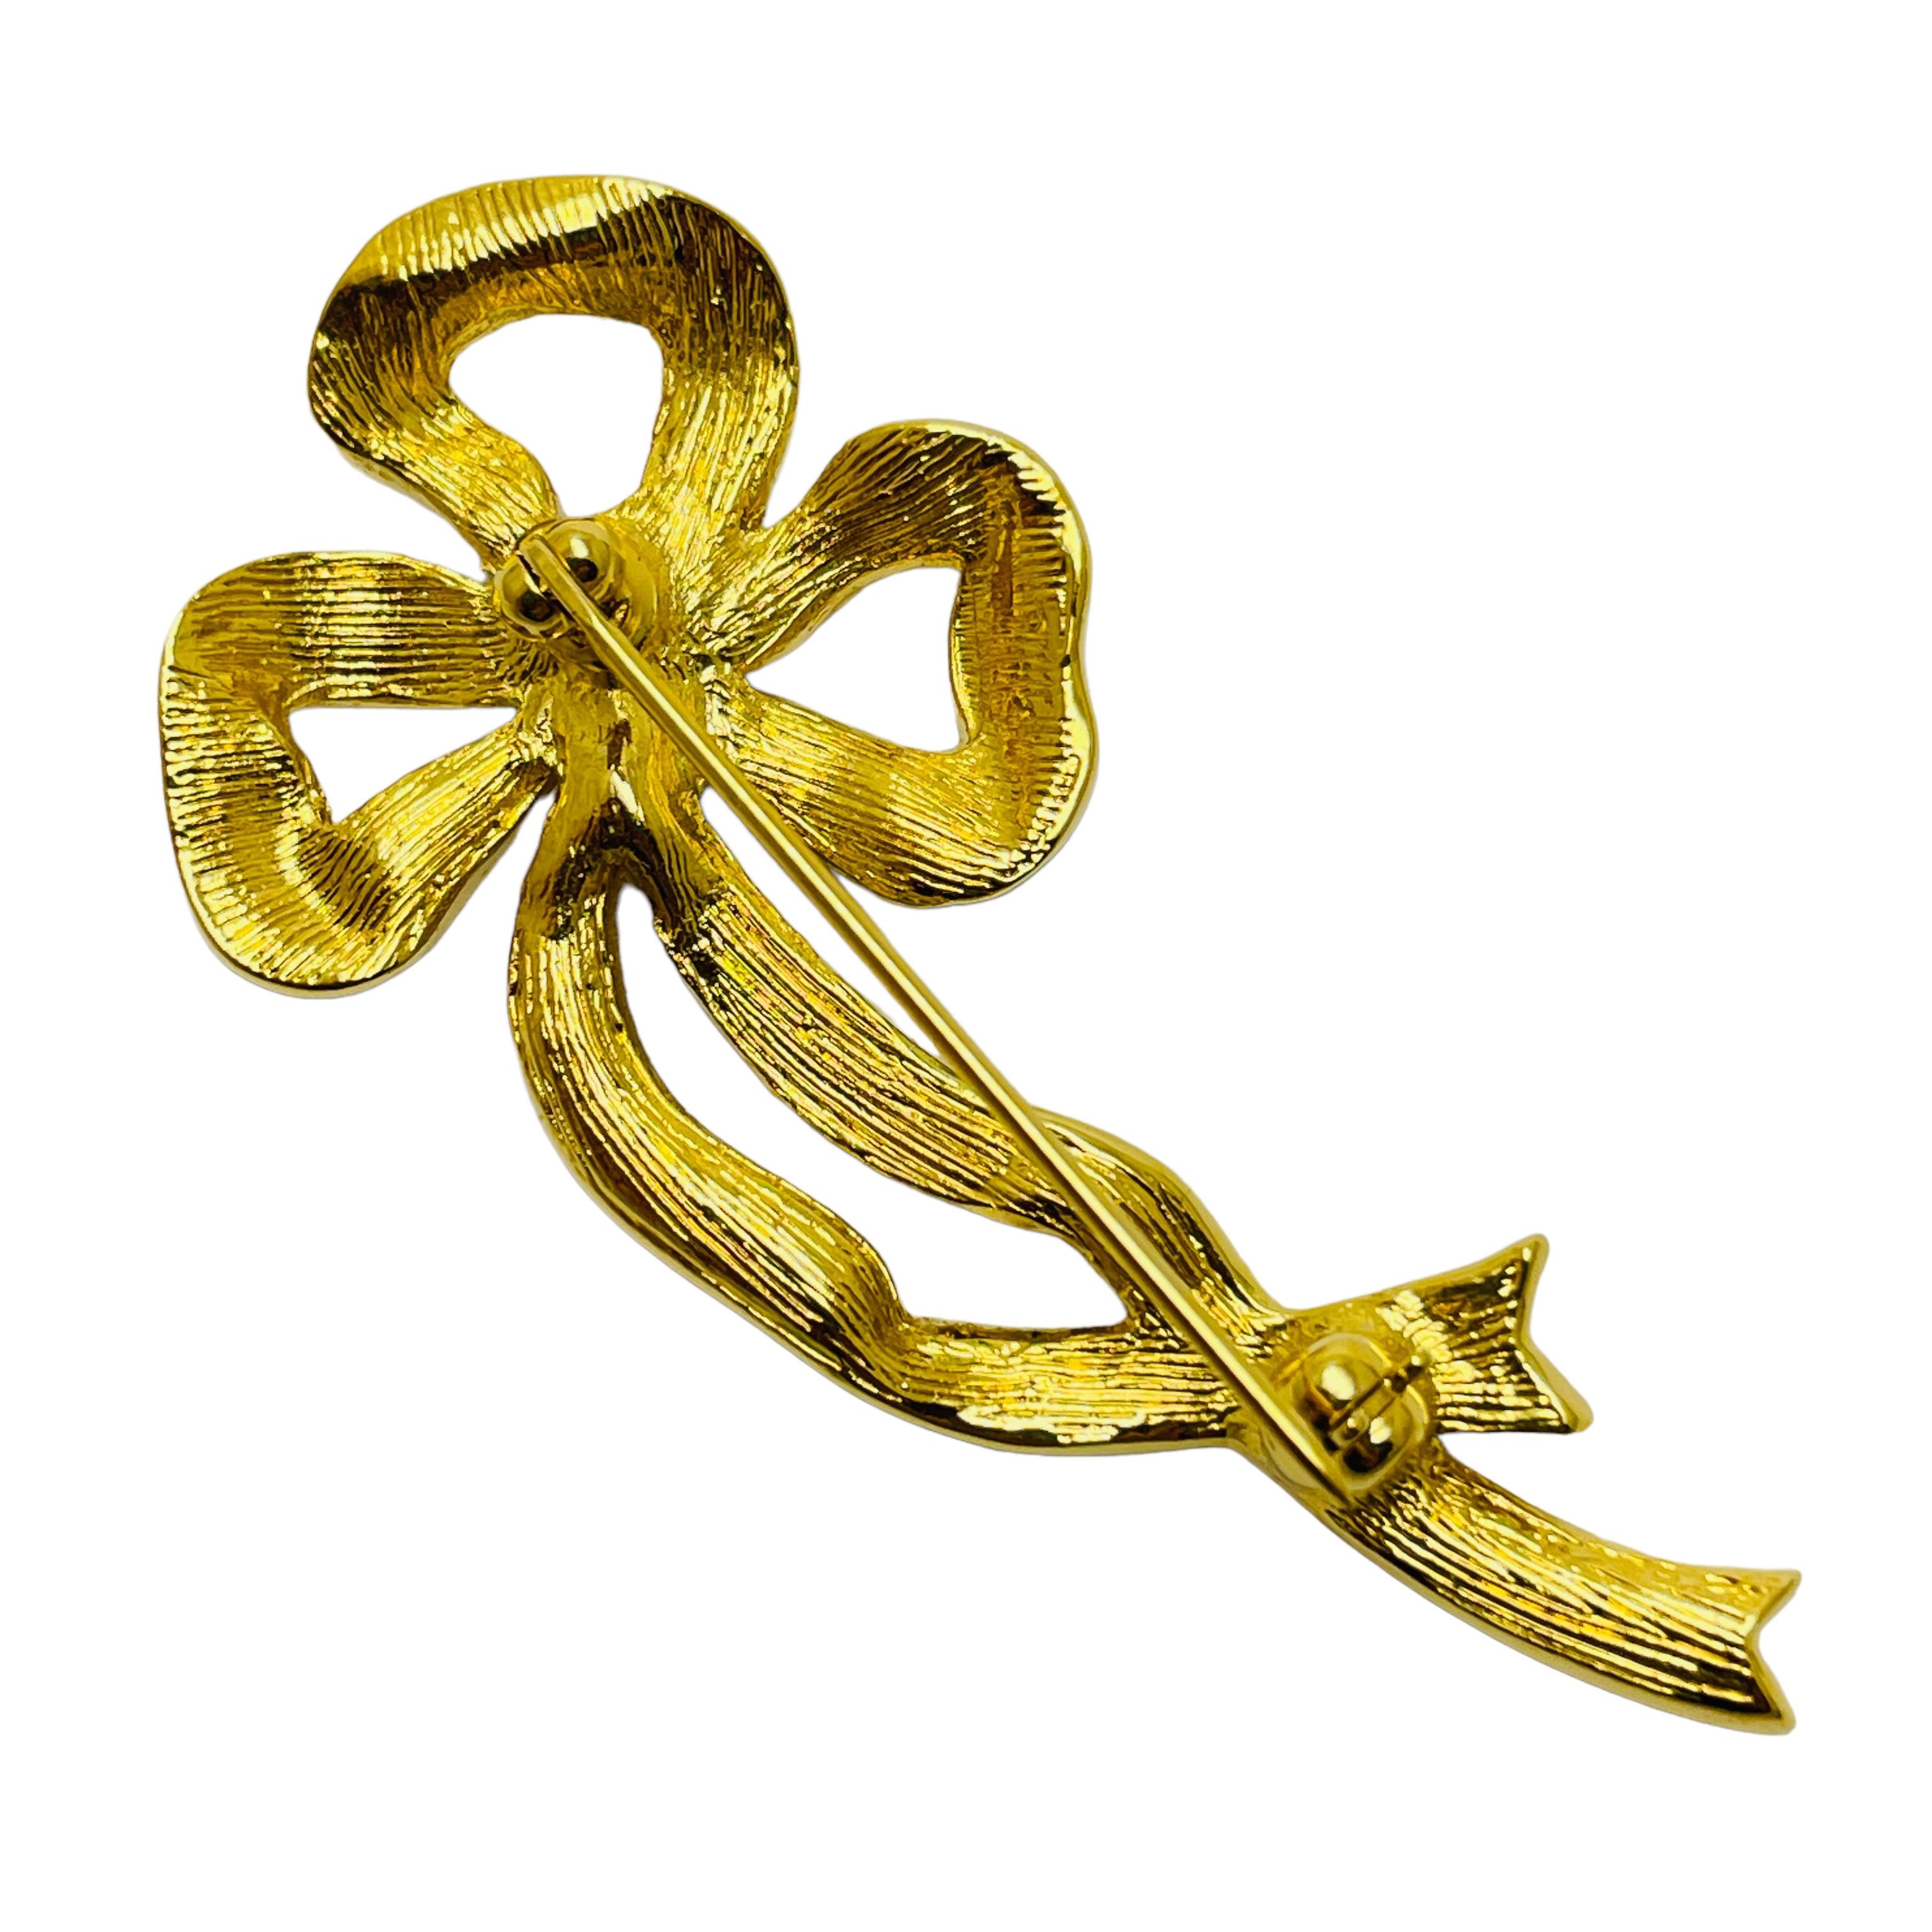 Vintage gold enamel rhinestone bow brooch In Good Condition For Sale In Palos Hills, IL